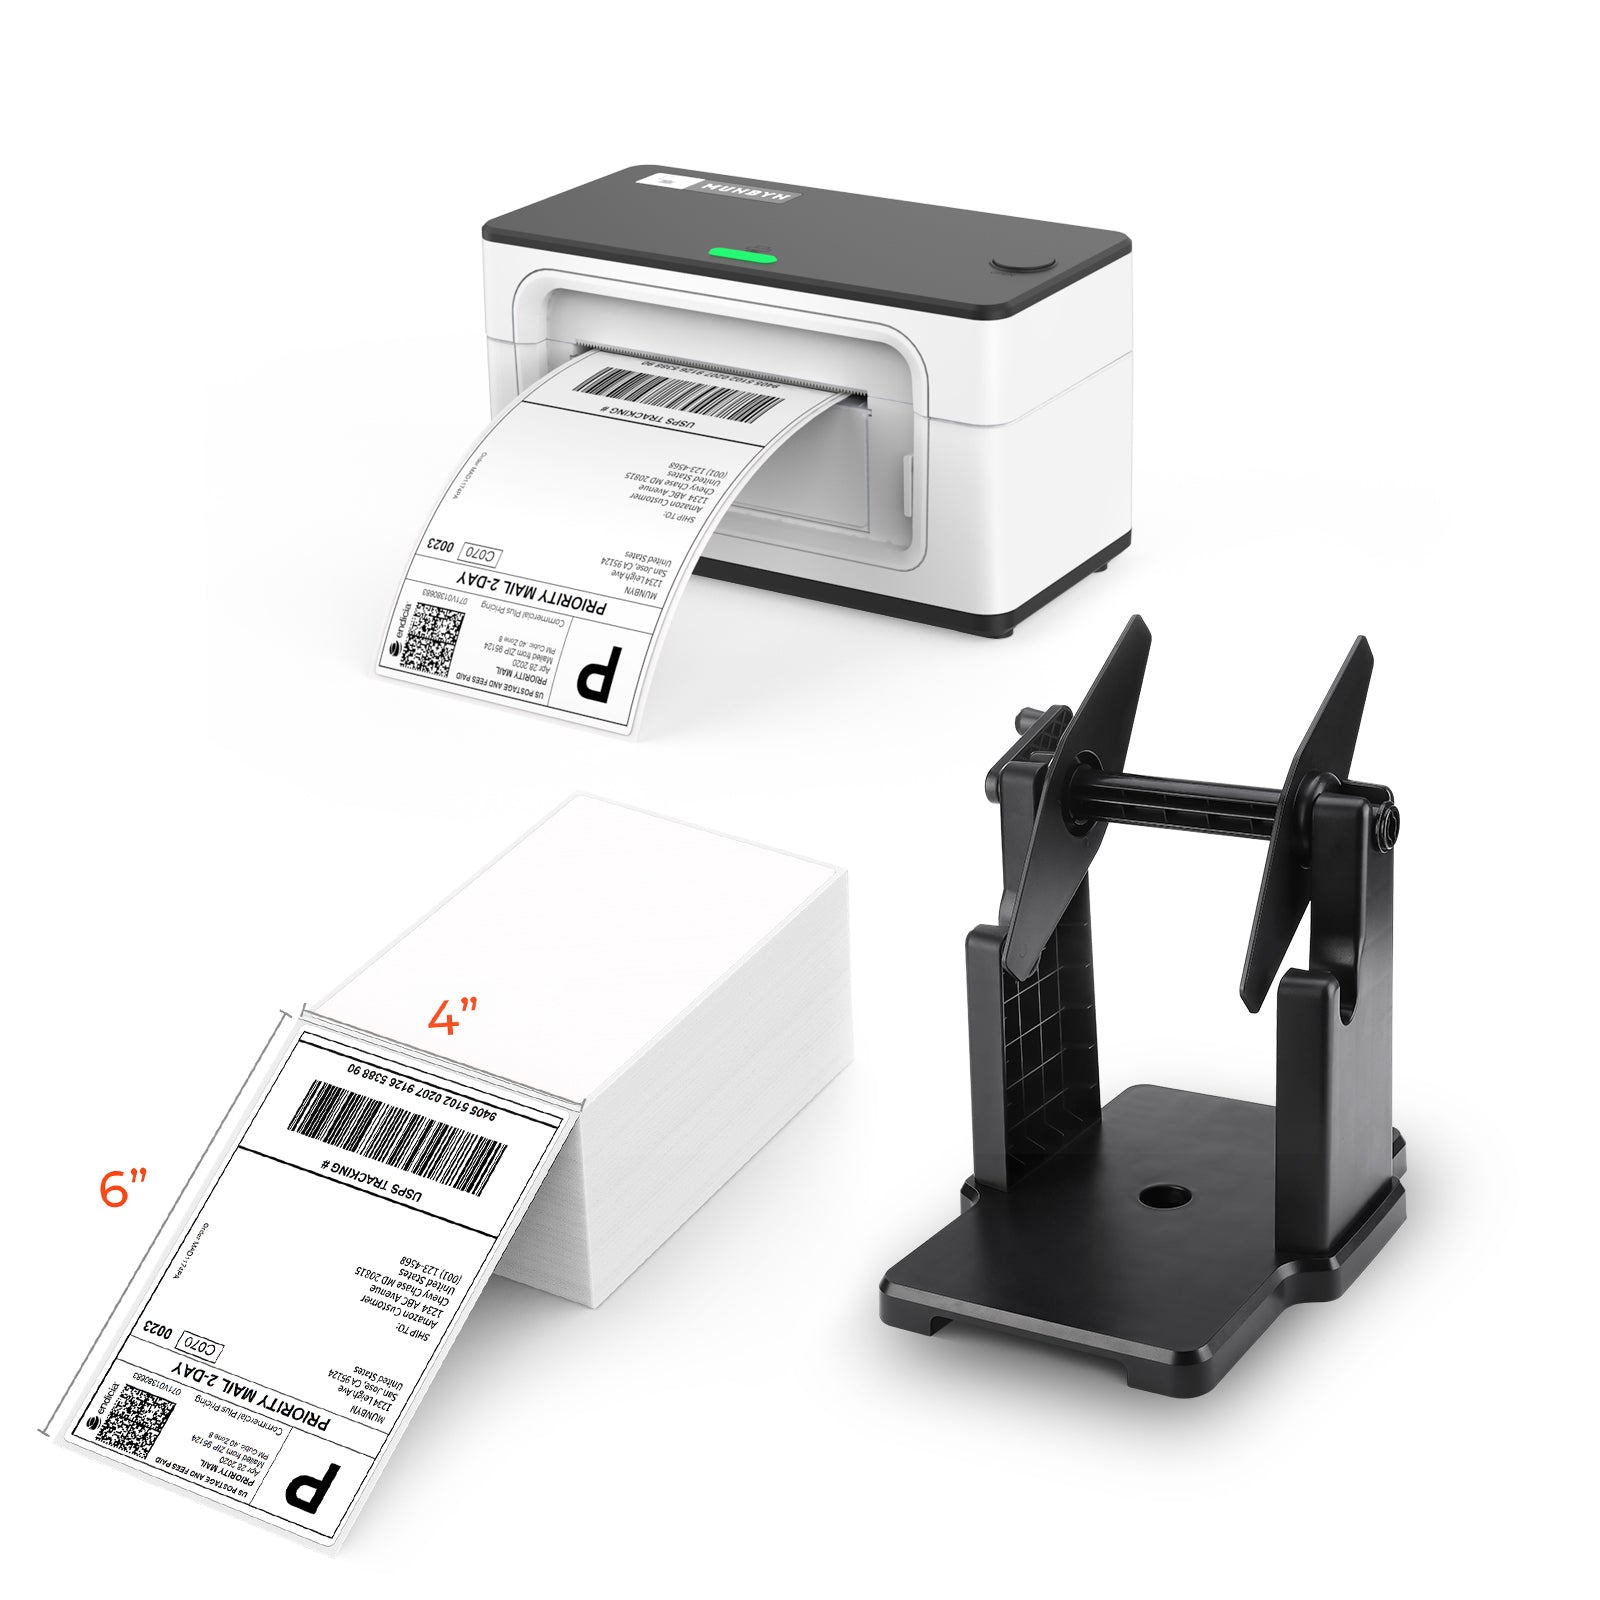 The MUNBYN P941 Pro cheap printer kit includes a thermal printer, a label roll holder and a stack of 100mm x 150mm shipping labels.